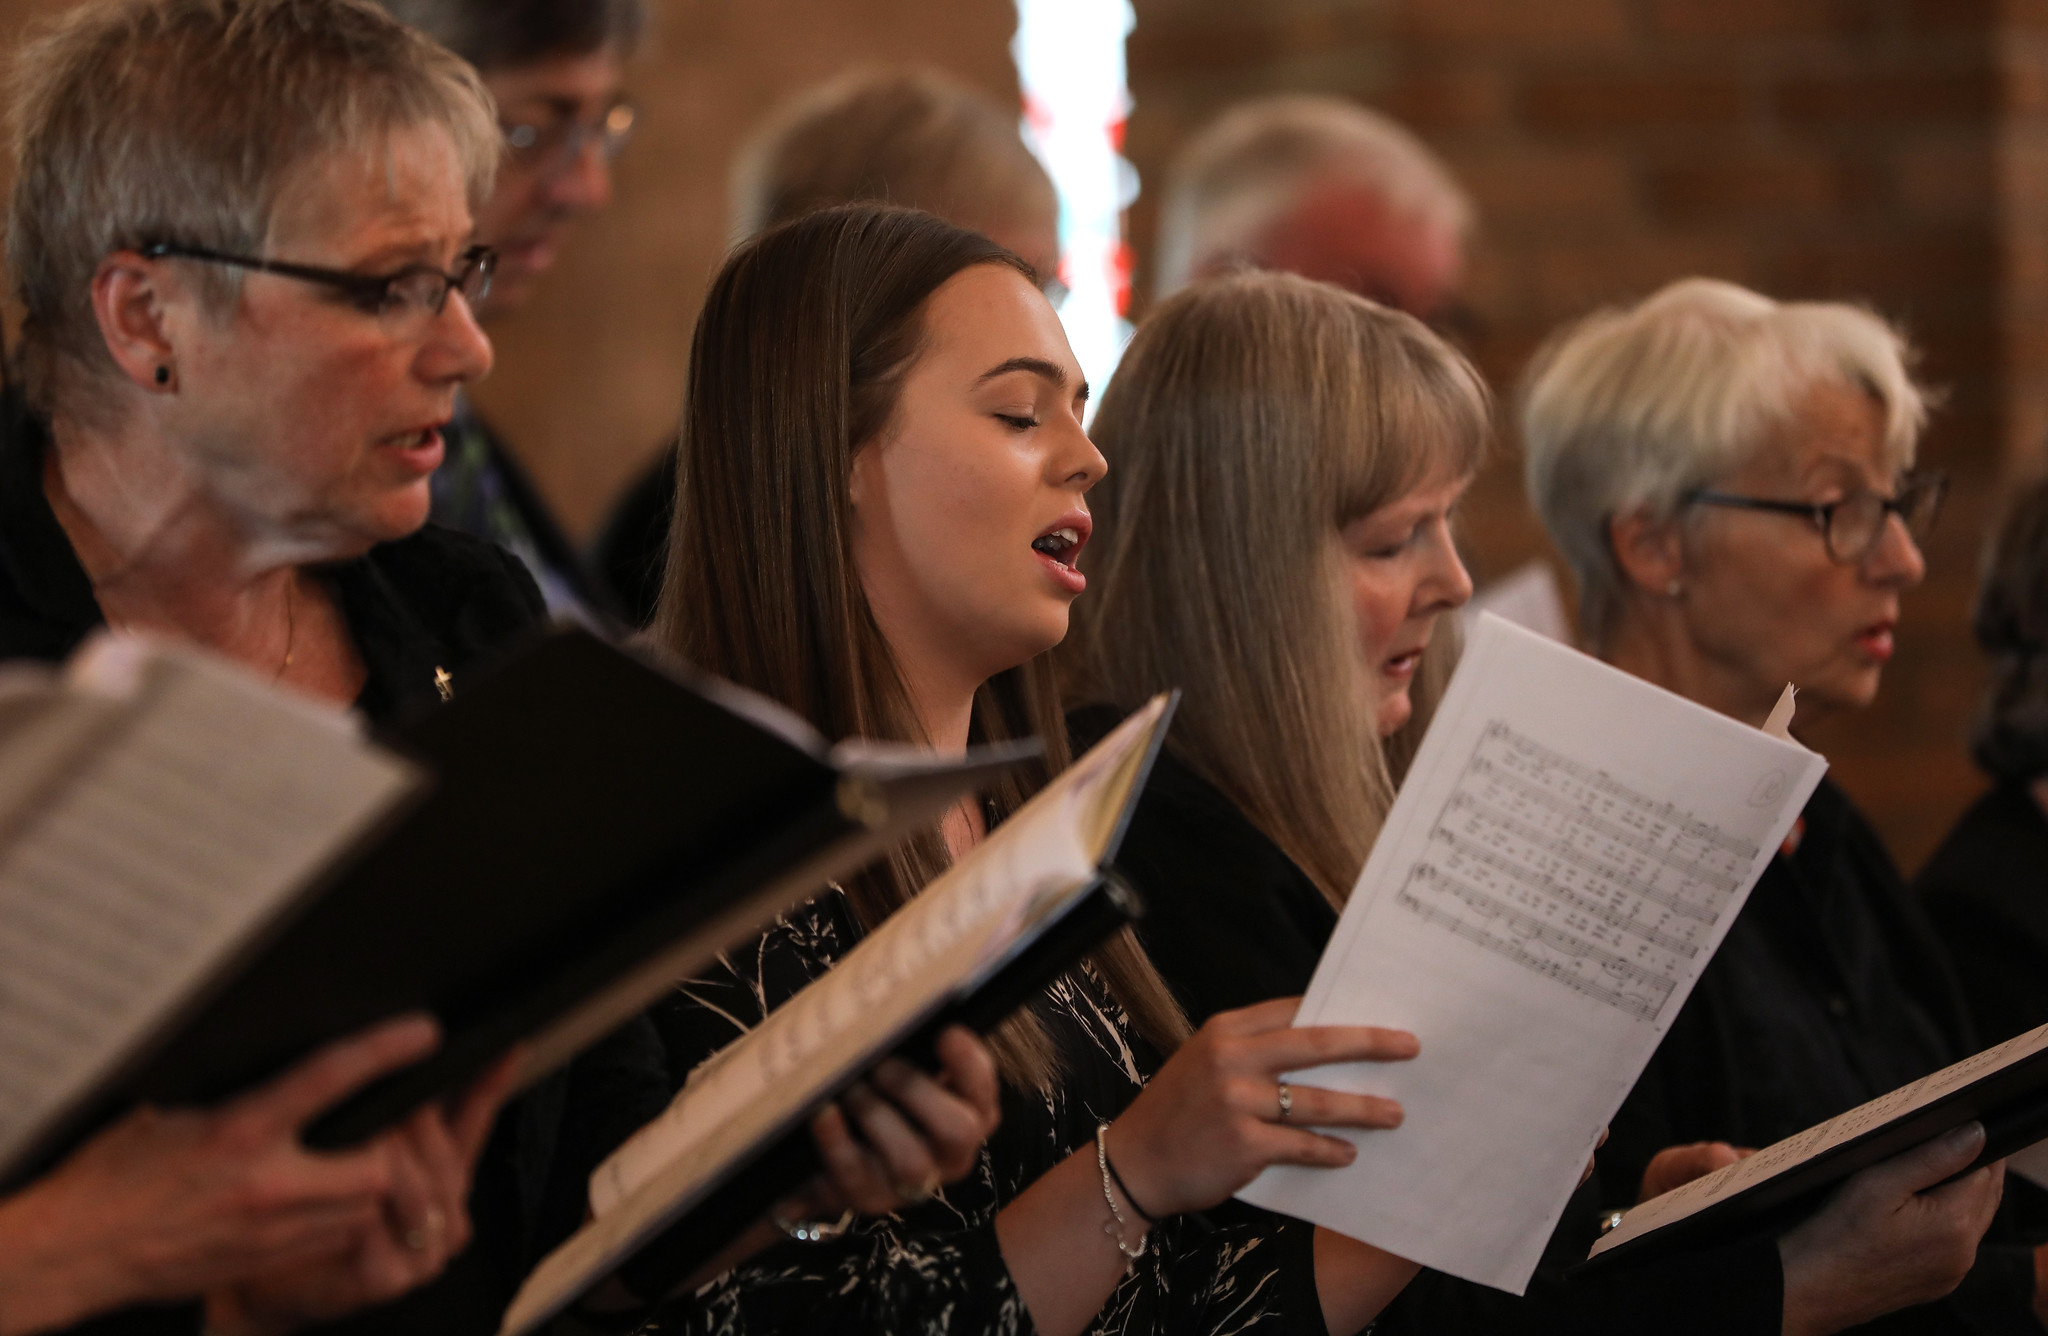 Members of the diocesan choir – Photo by Chris Booth